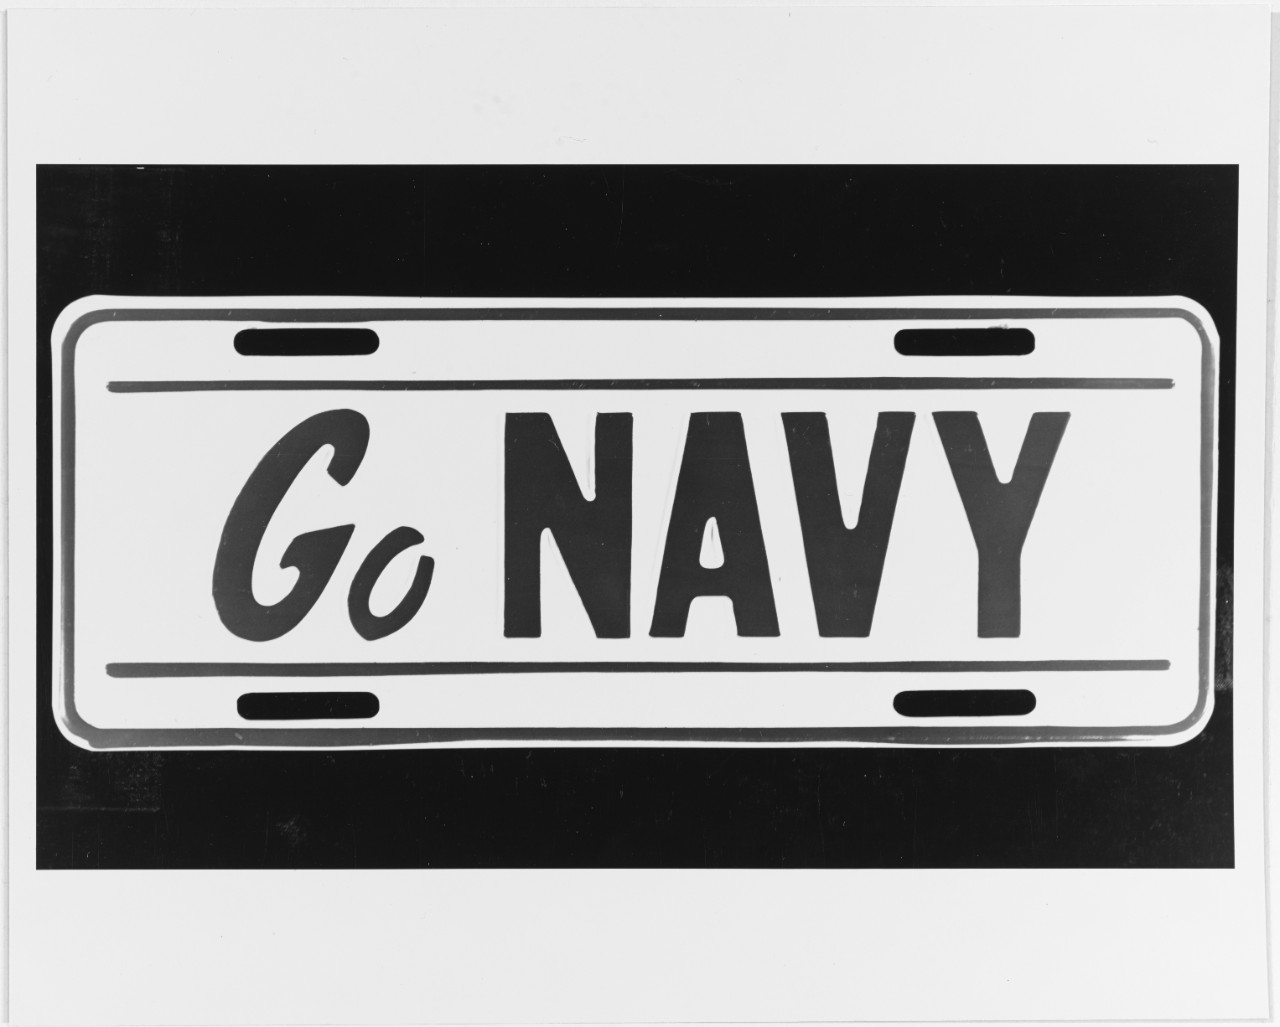 Recruiting license plate